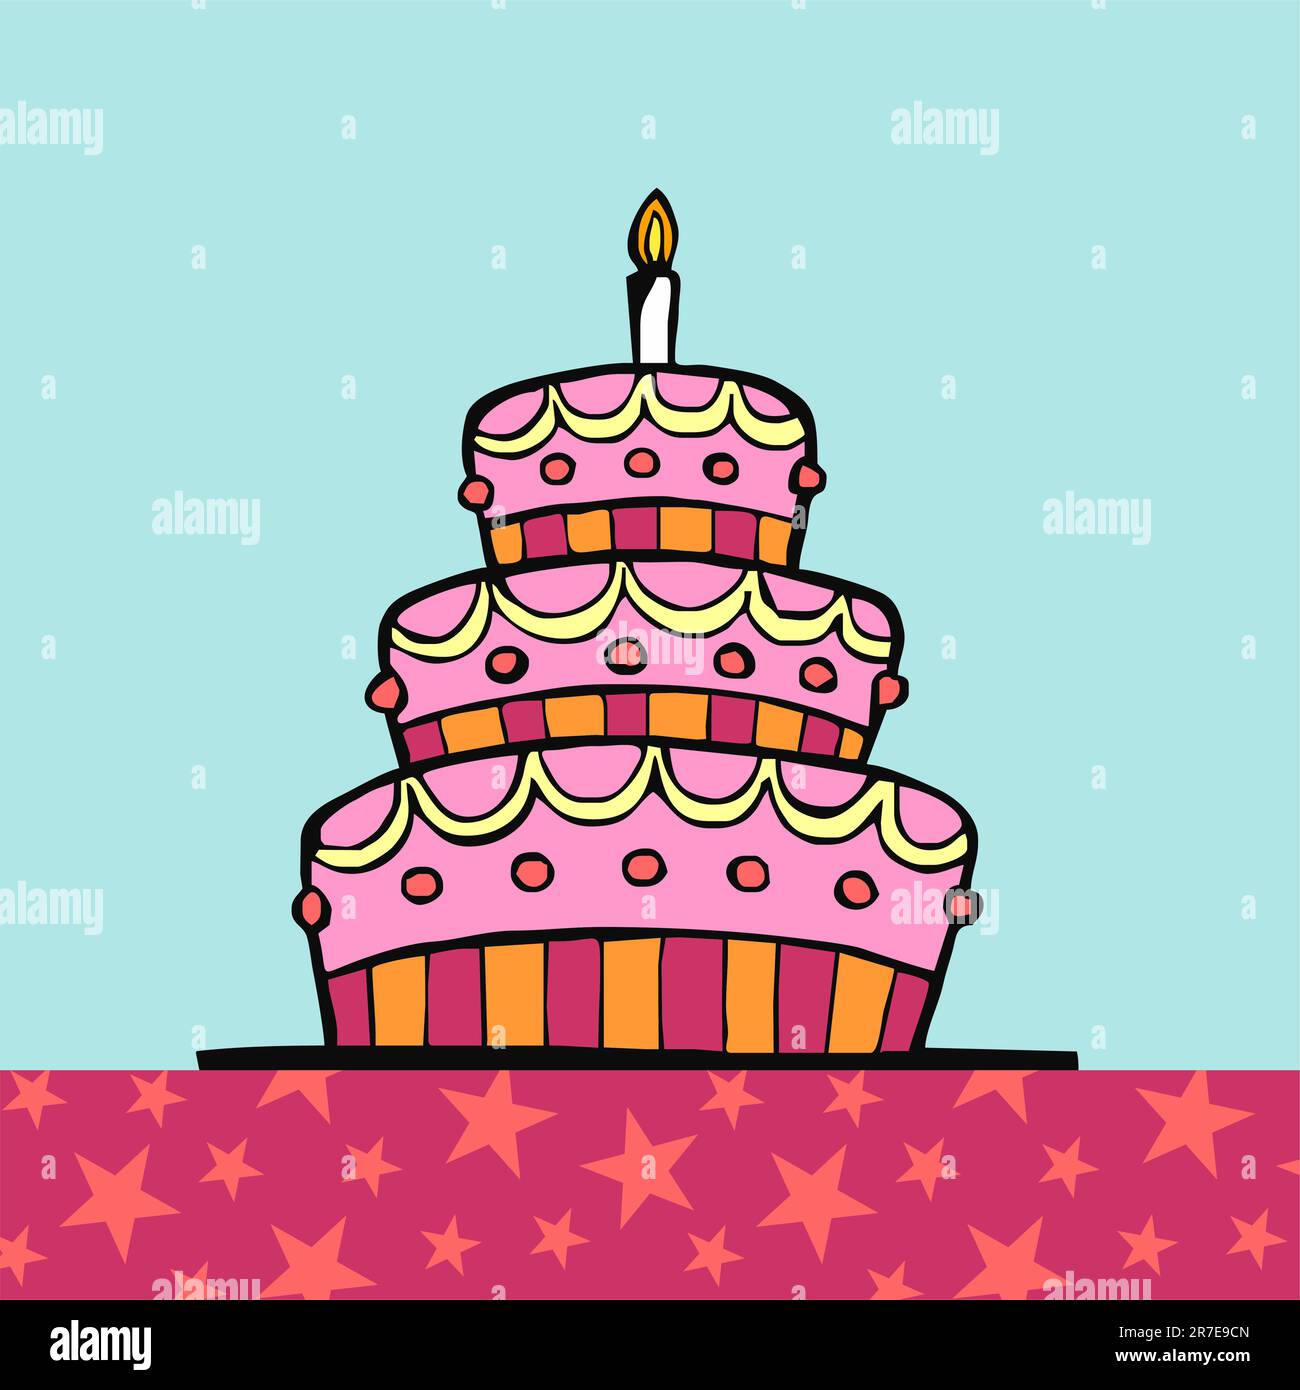 Birthday cake on table with pink tablecloth with stars on light blue background Stock Vector